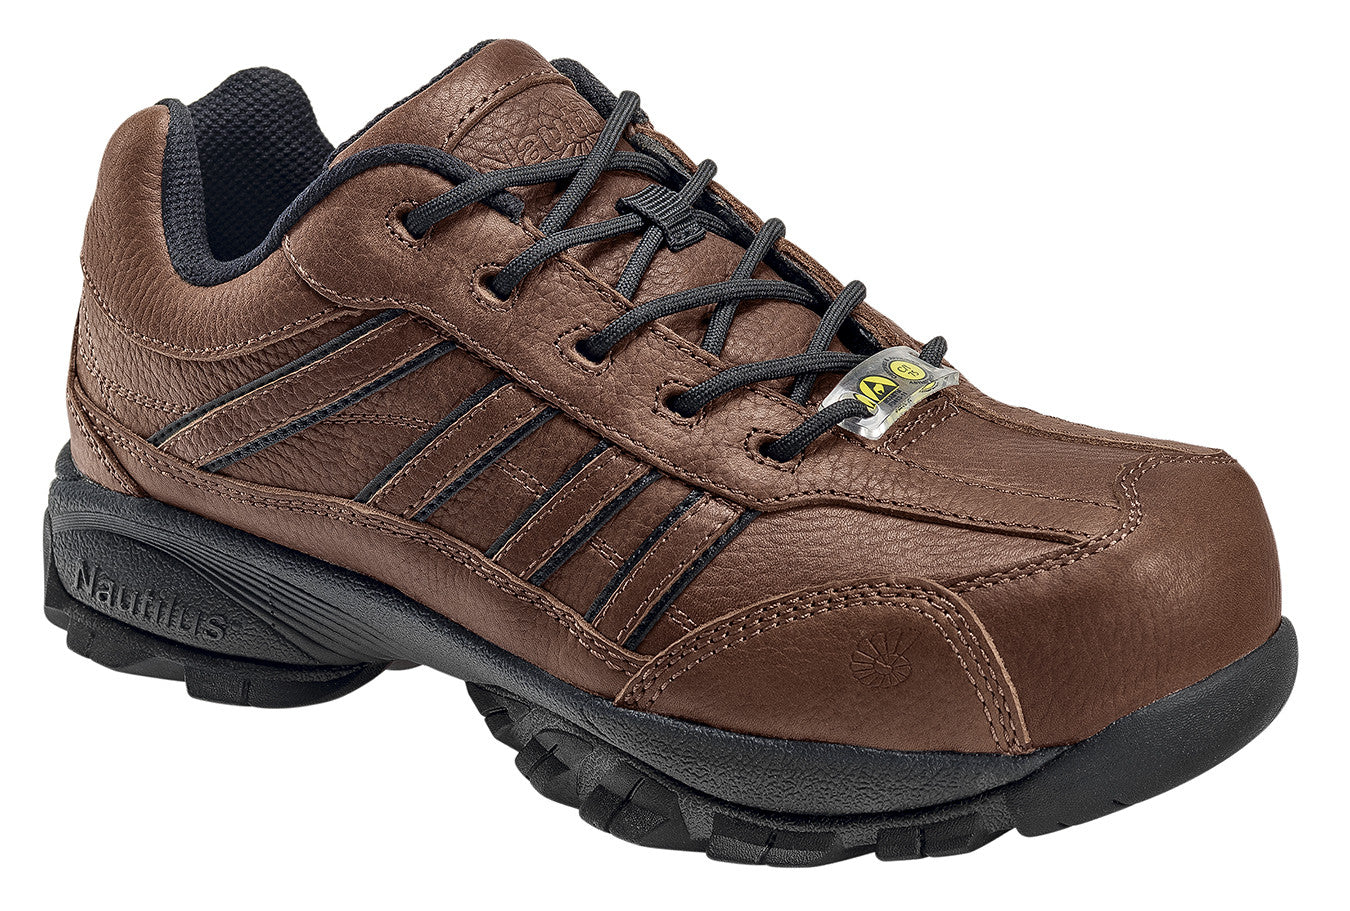 ESD No Exposed Metal Safety Toe Oxford